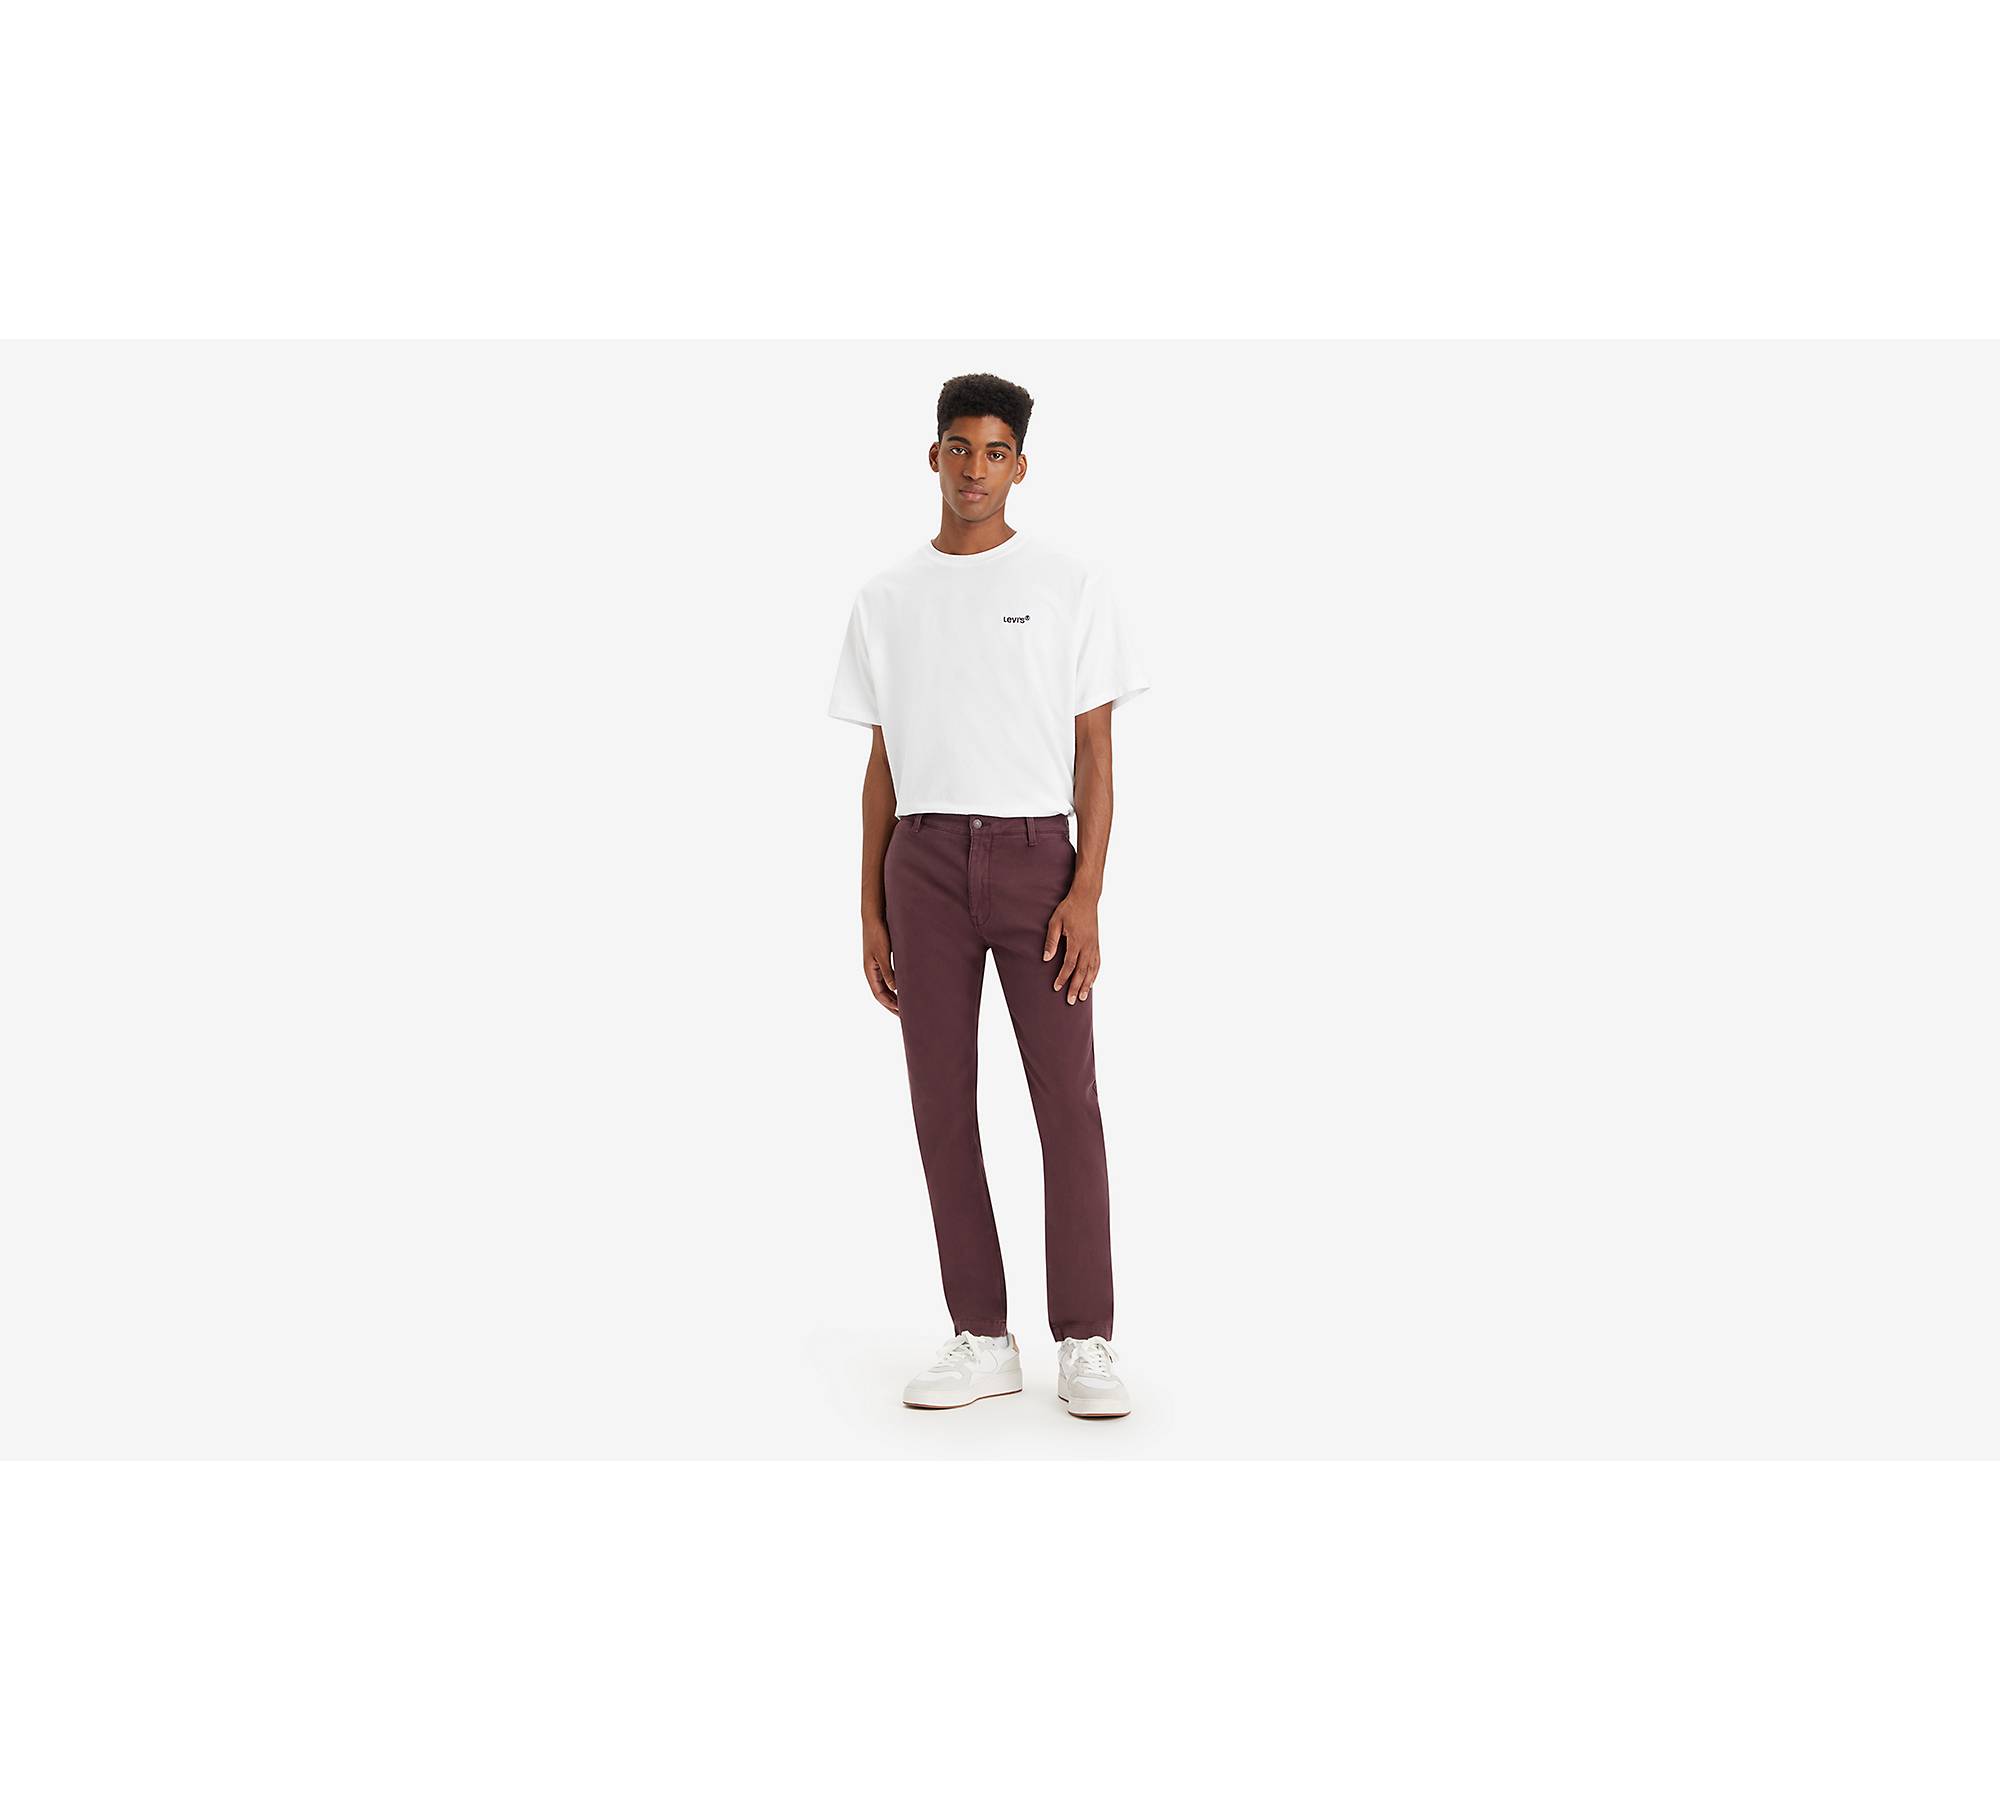 Levis Pants Mens 31x32 Red Burgundy Chino Brushed Twill Mid Rise